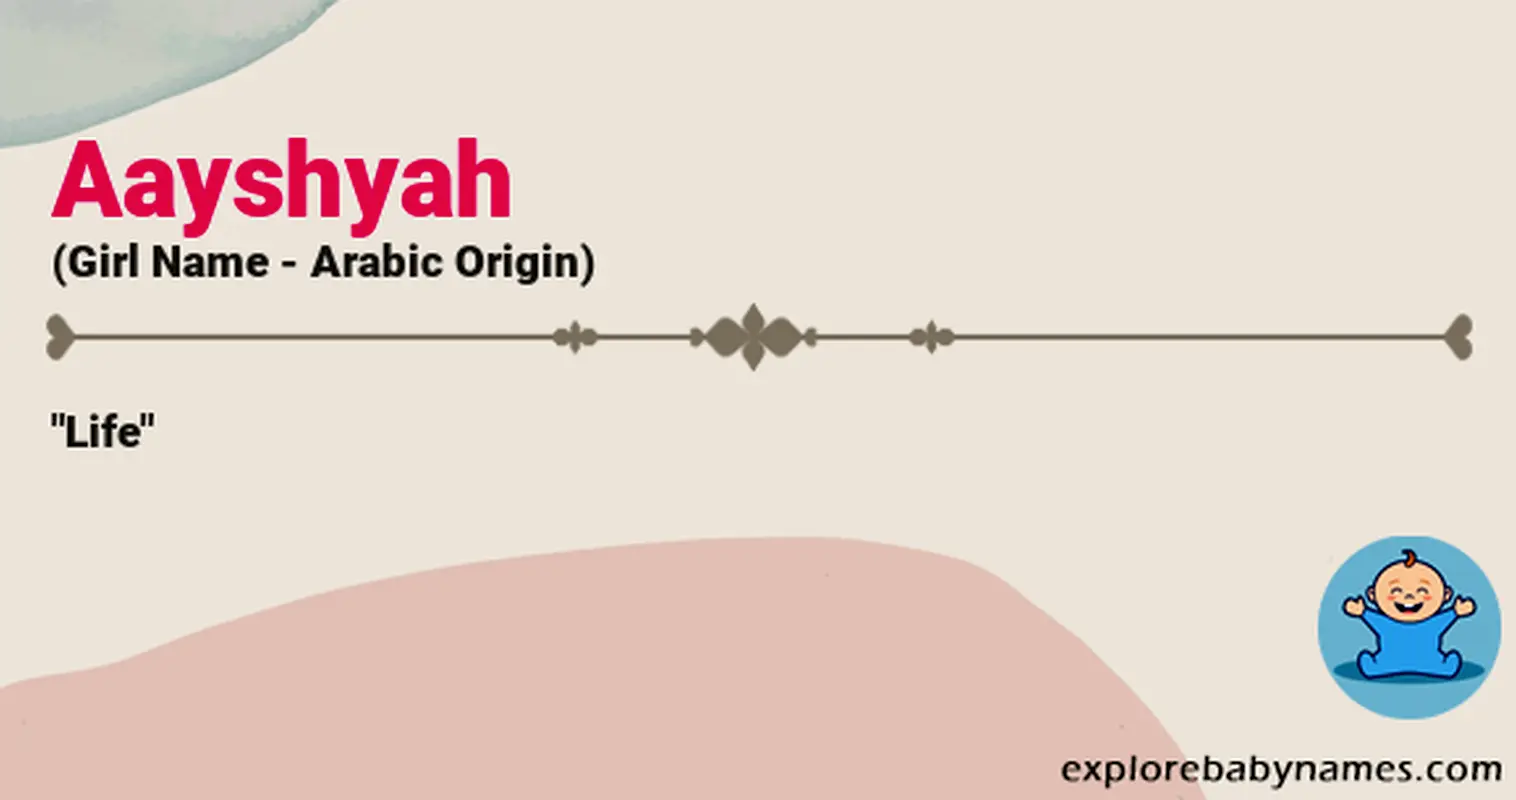 Meaning of Aayshyah